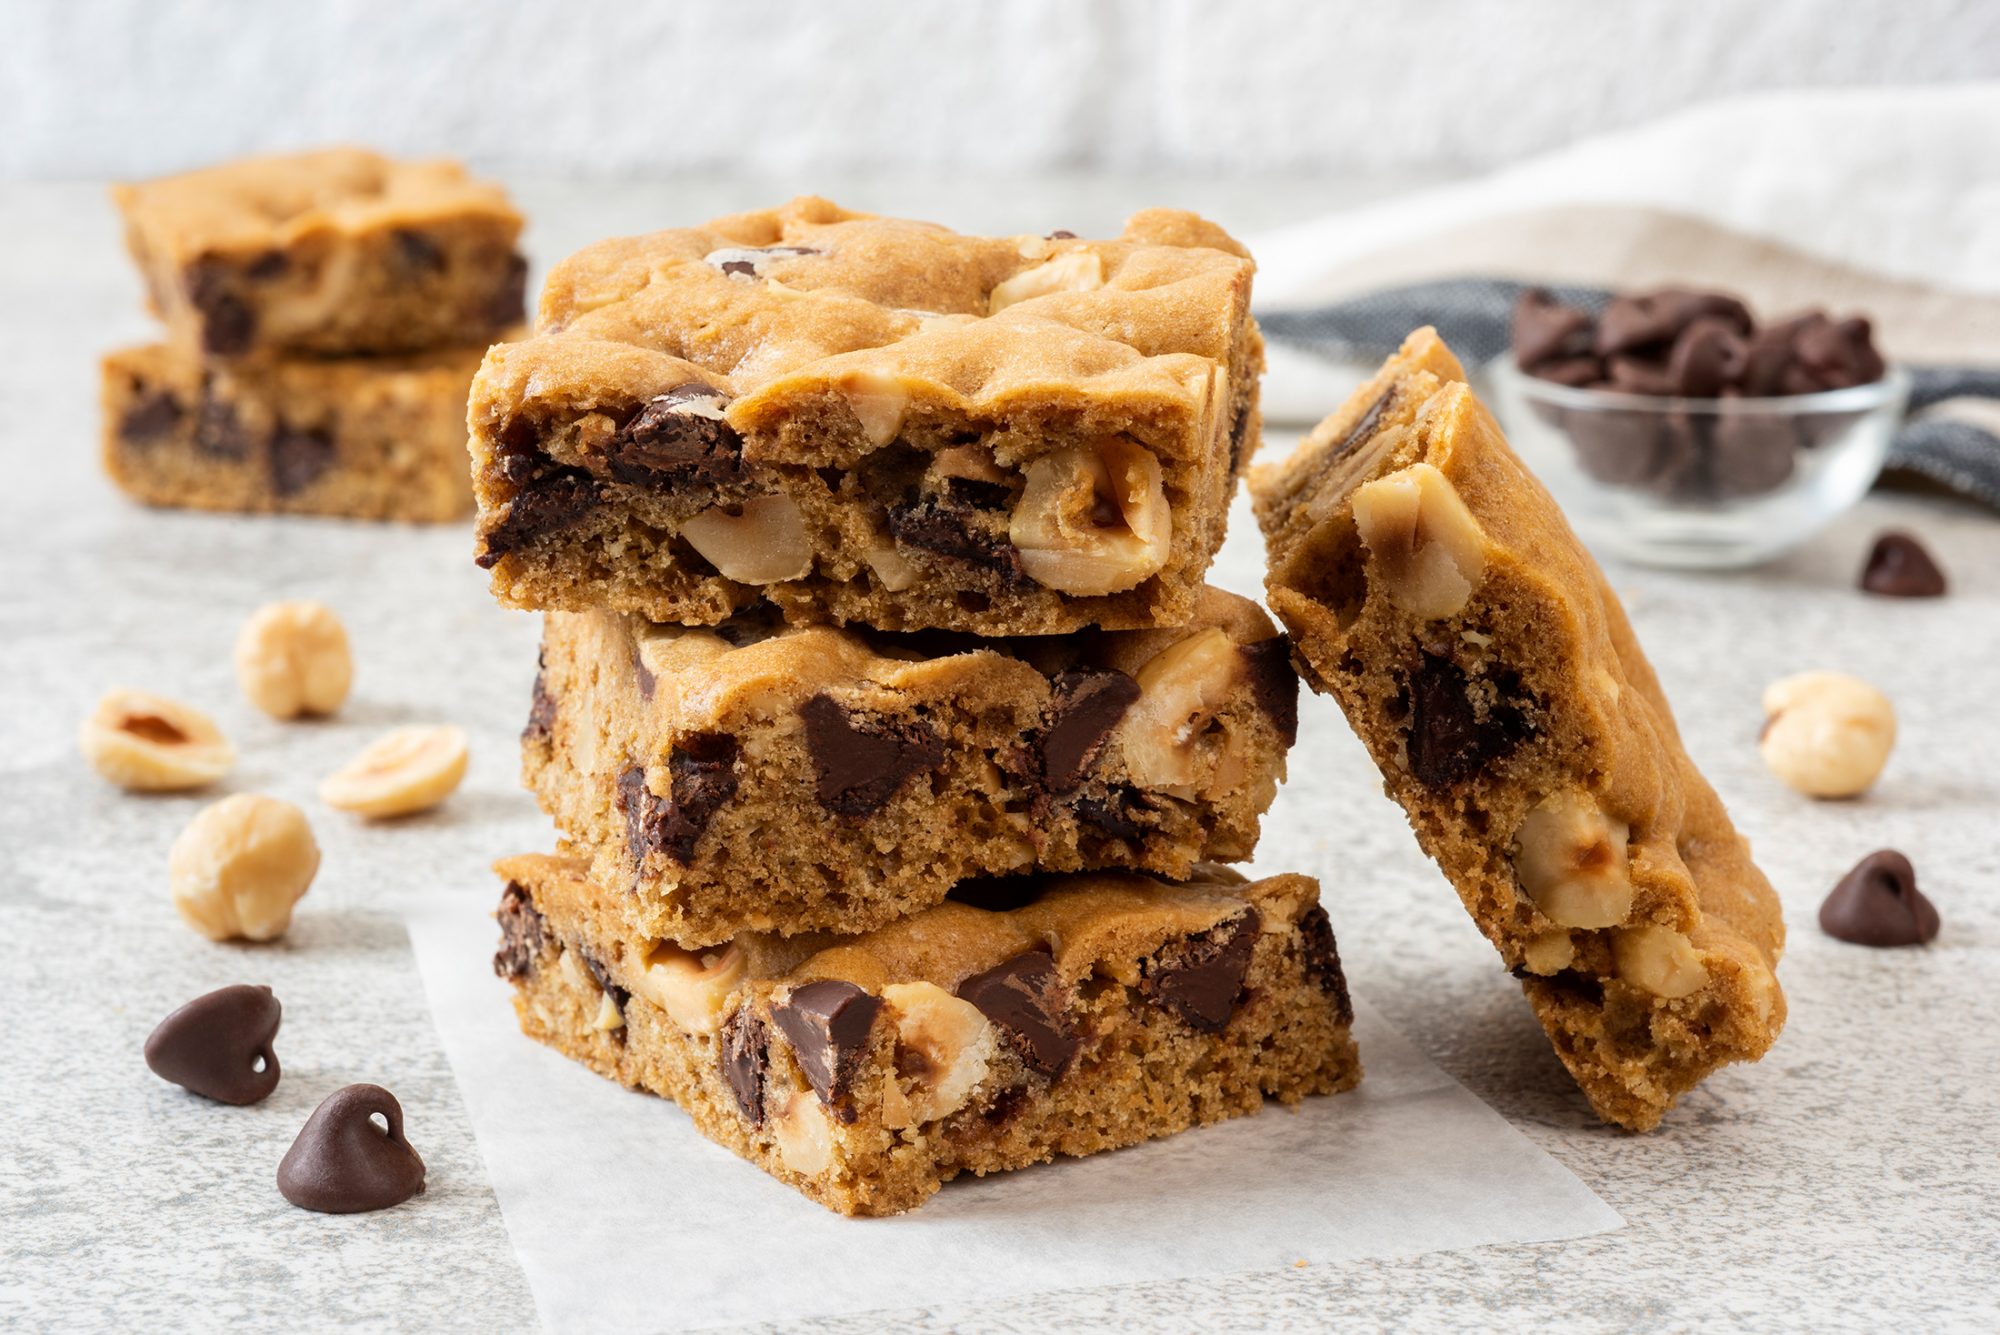 Stack of cookie bars